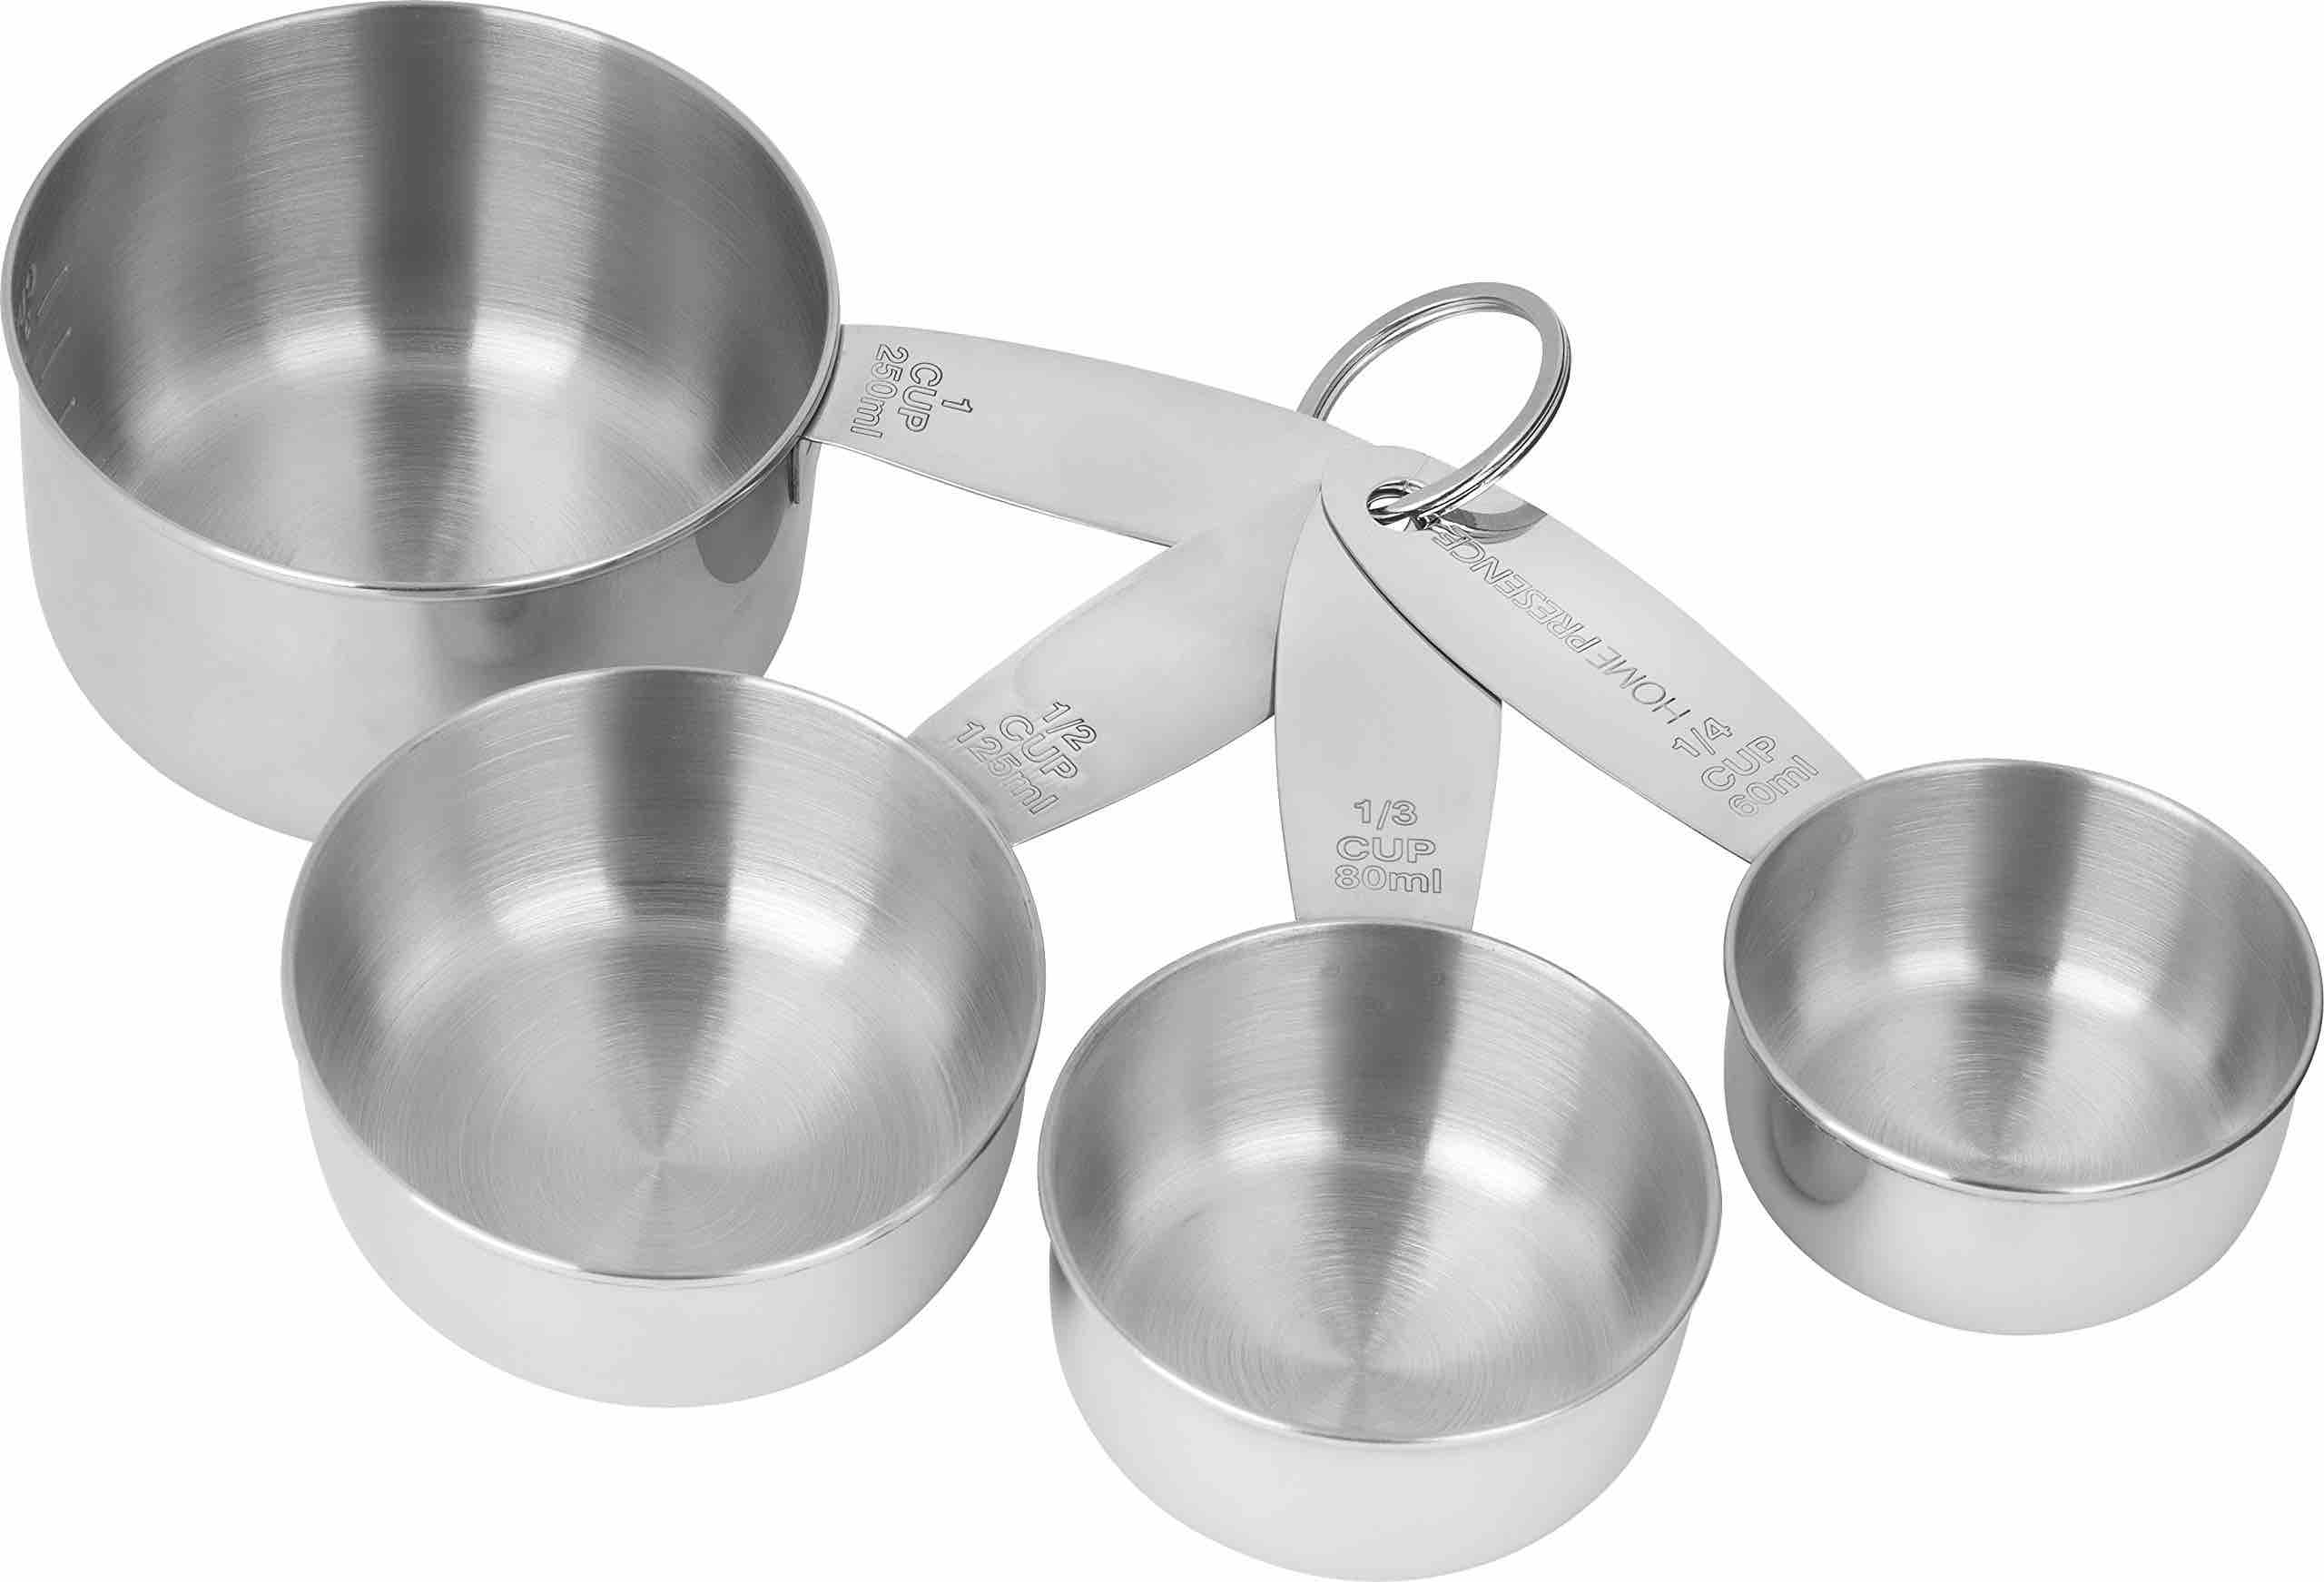 4pc Stainless Steel Measuring Cups